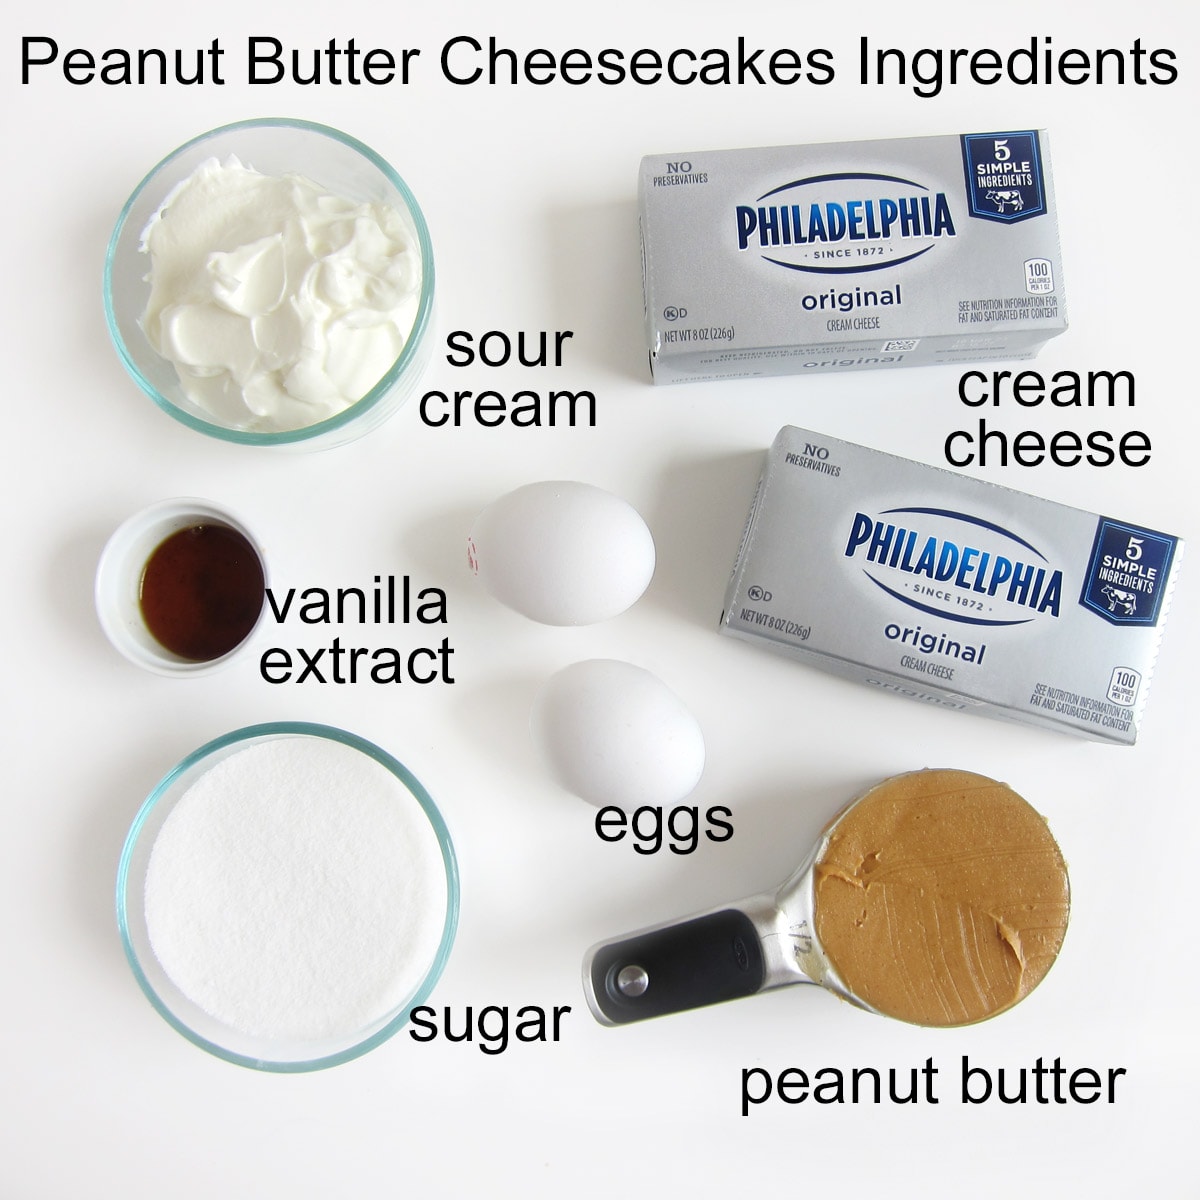 Peanut butter cheesecake ingredients including cream cheese, peanut butter, sugar, eggs, vanilla, and sour cream.